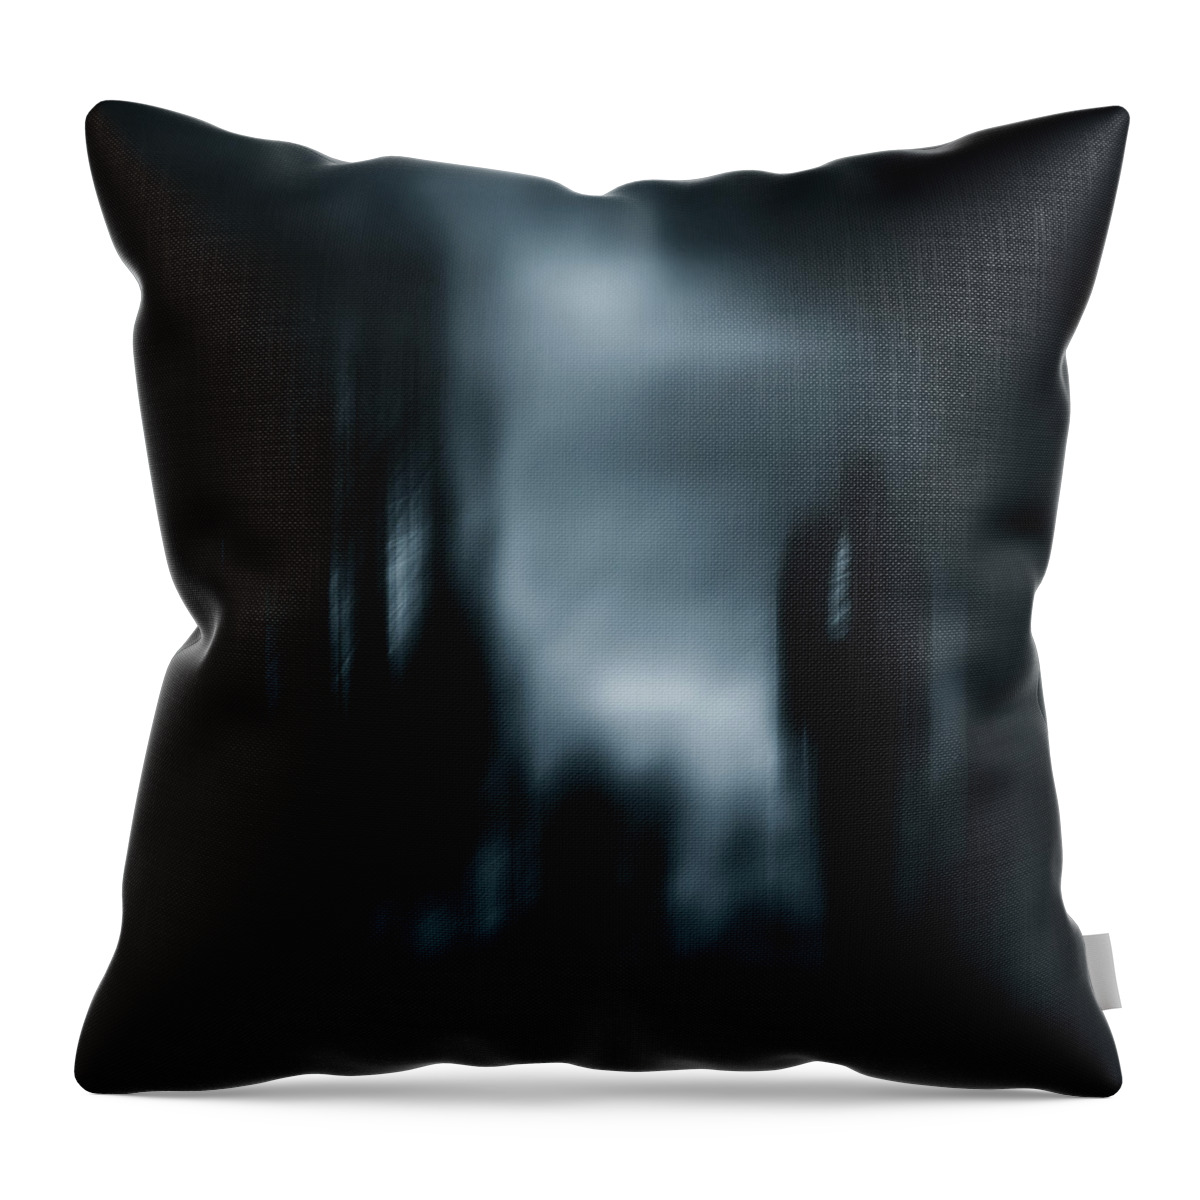 Monochrome Throw Pillow featuring the photograph Return to the Light by Grant Galbraith